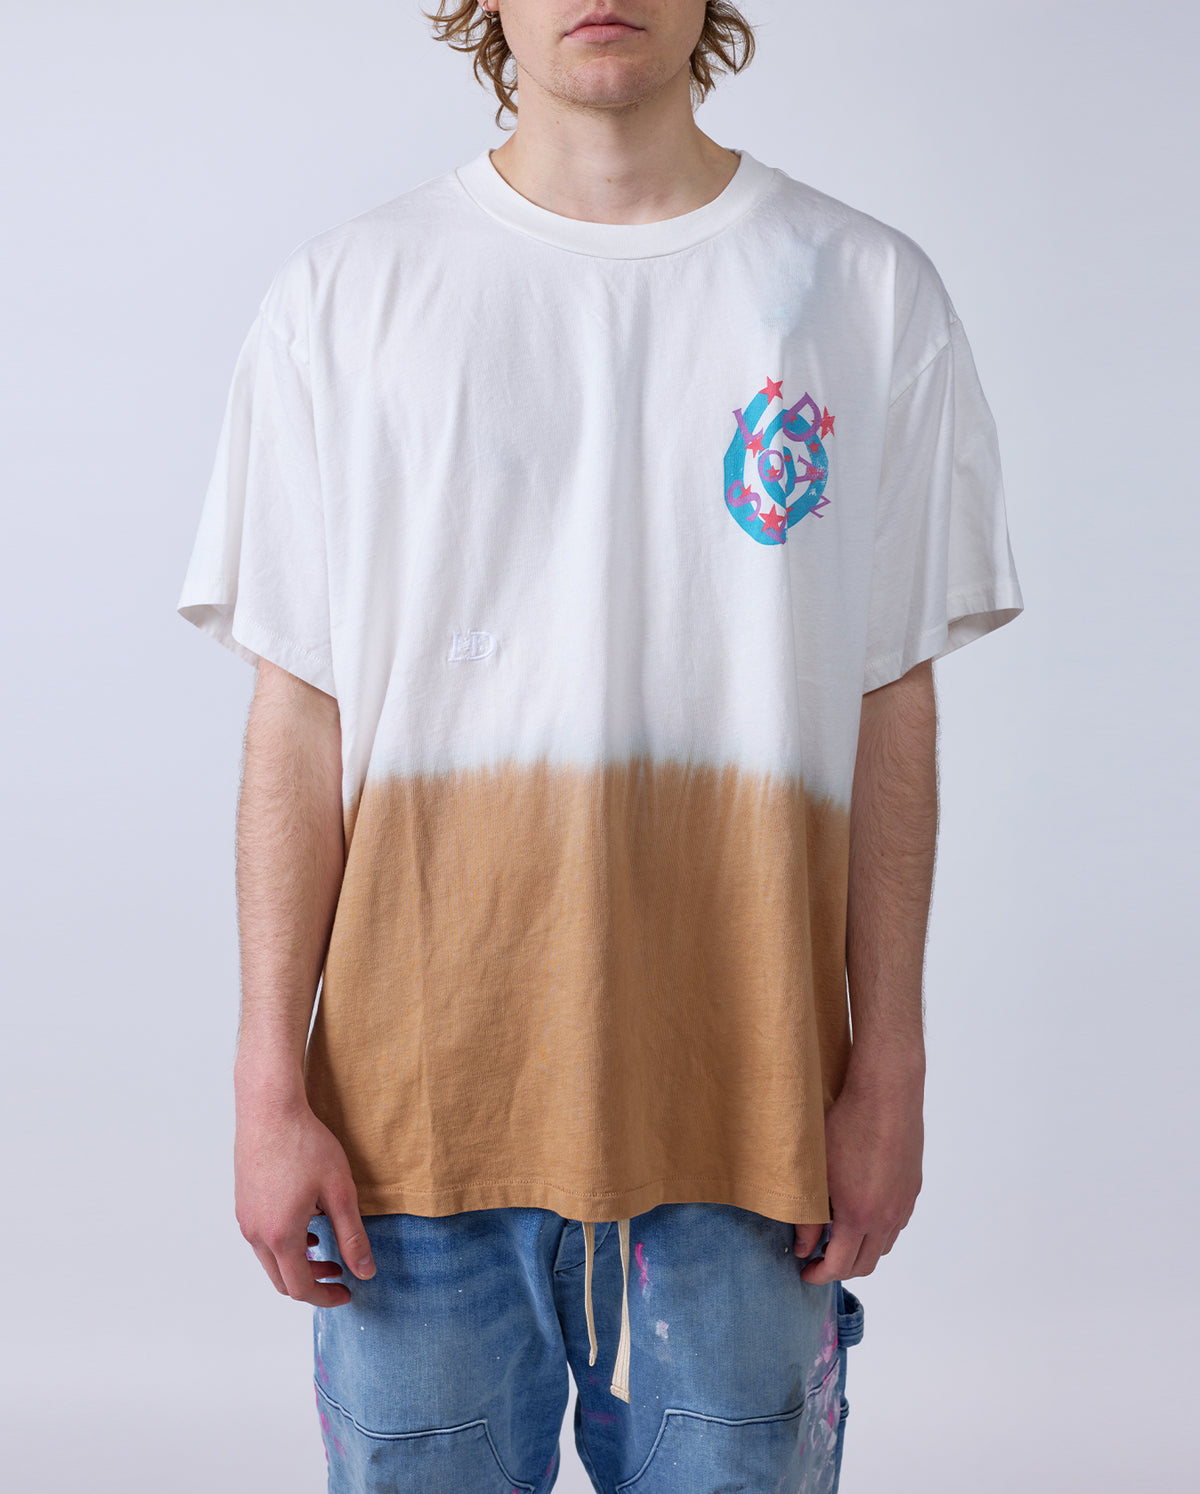 Fred Segal Exclusive Retro Tee